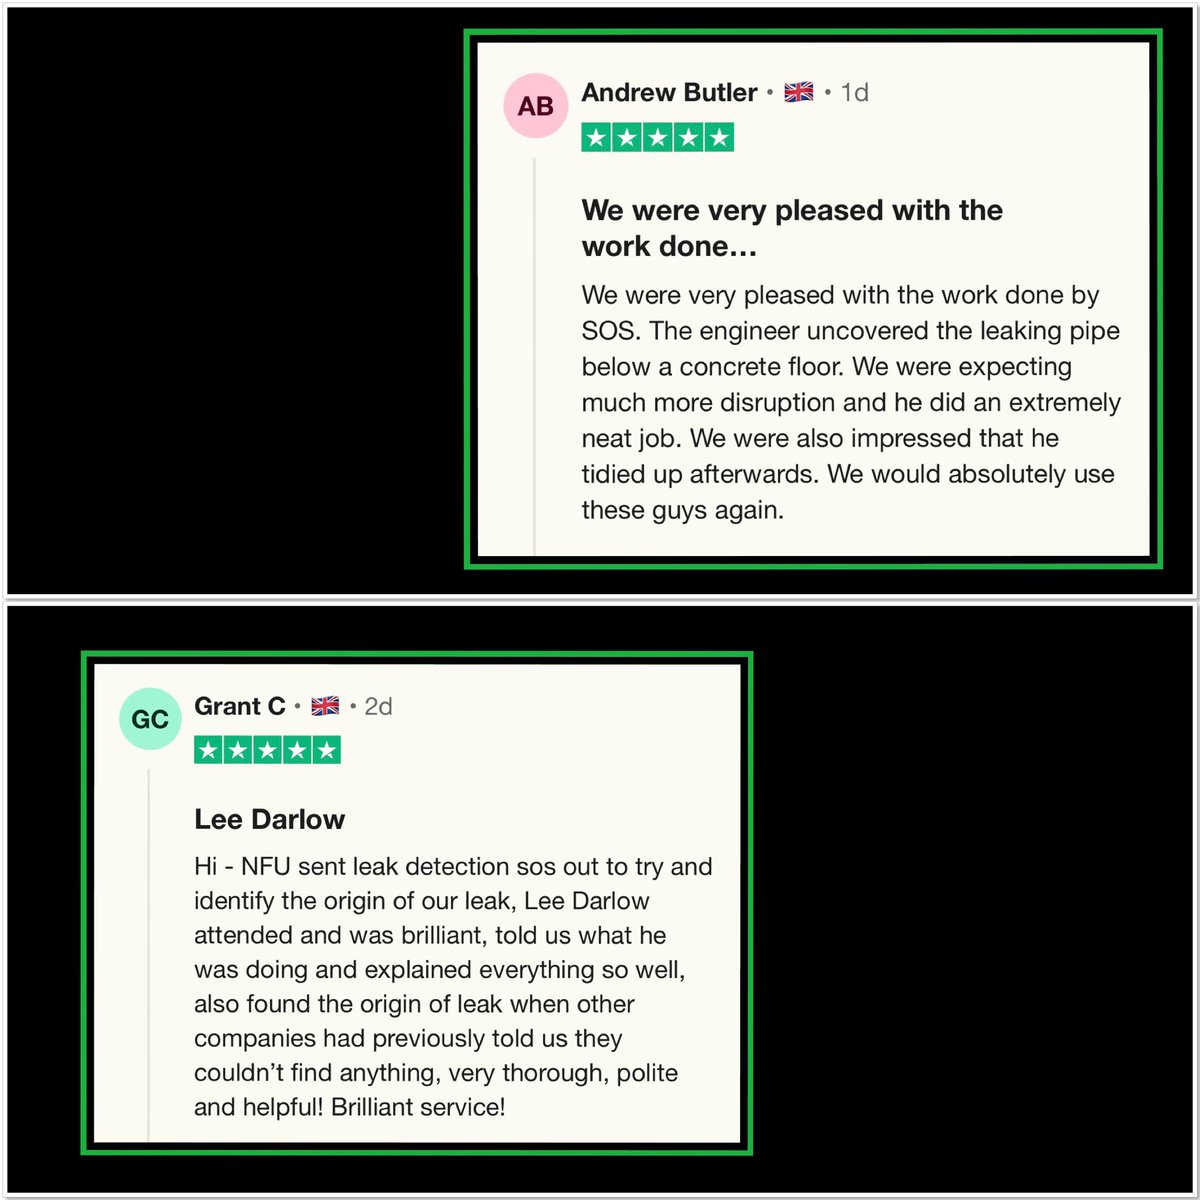 More fantastic reviews left for us on @Trustpilot this week! Here is just a snapshot - thank you to everyone who has taken the time to post a review. Well done to the team for these fantastic comments - very proud! #TeamSOS #TrustPilot #TrustPilotReviews #LeakDetection #Leak